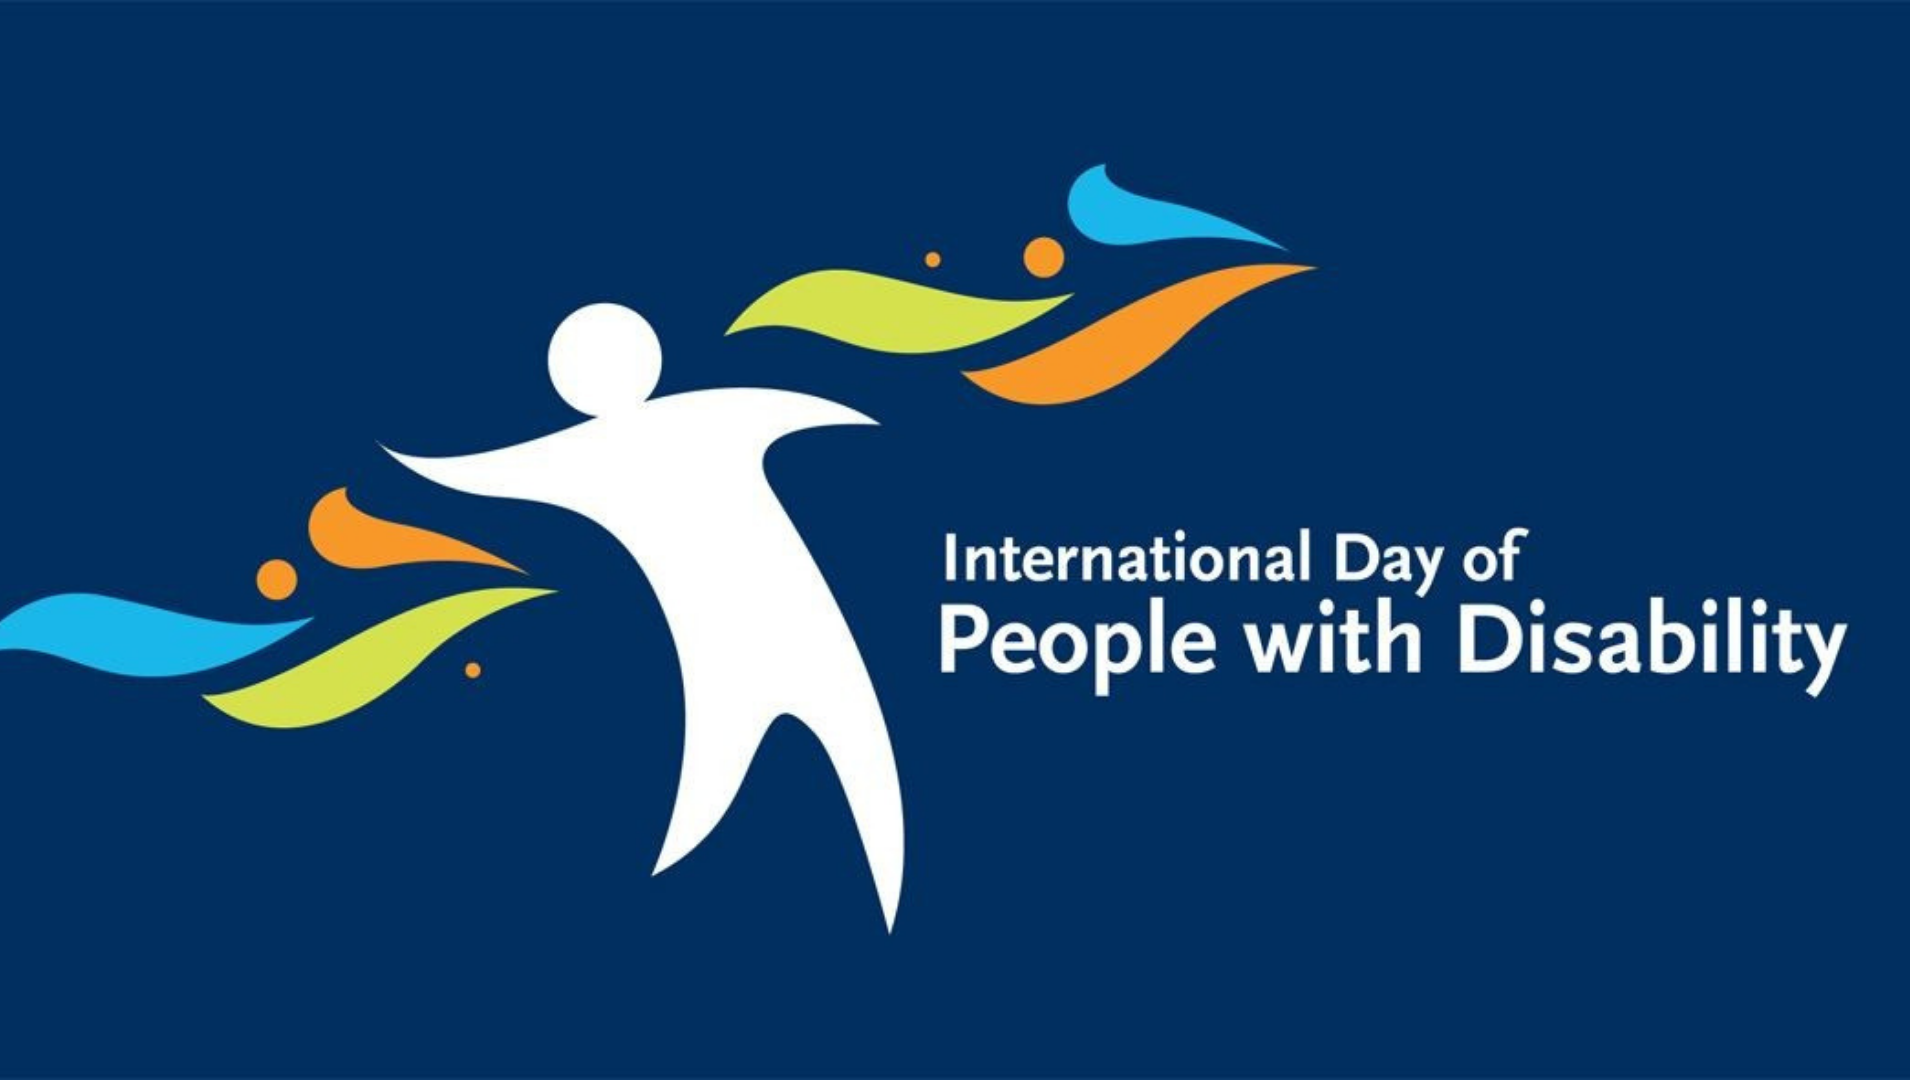 International Day of People with disability logo